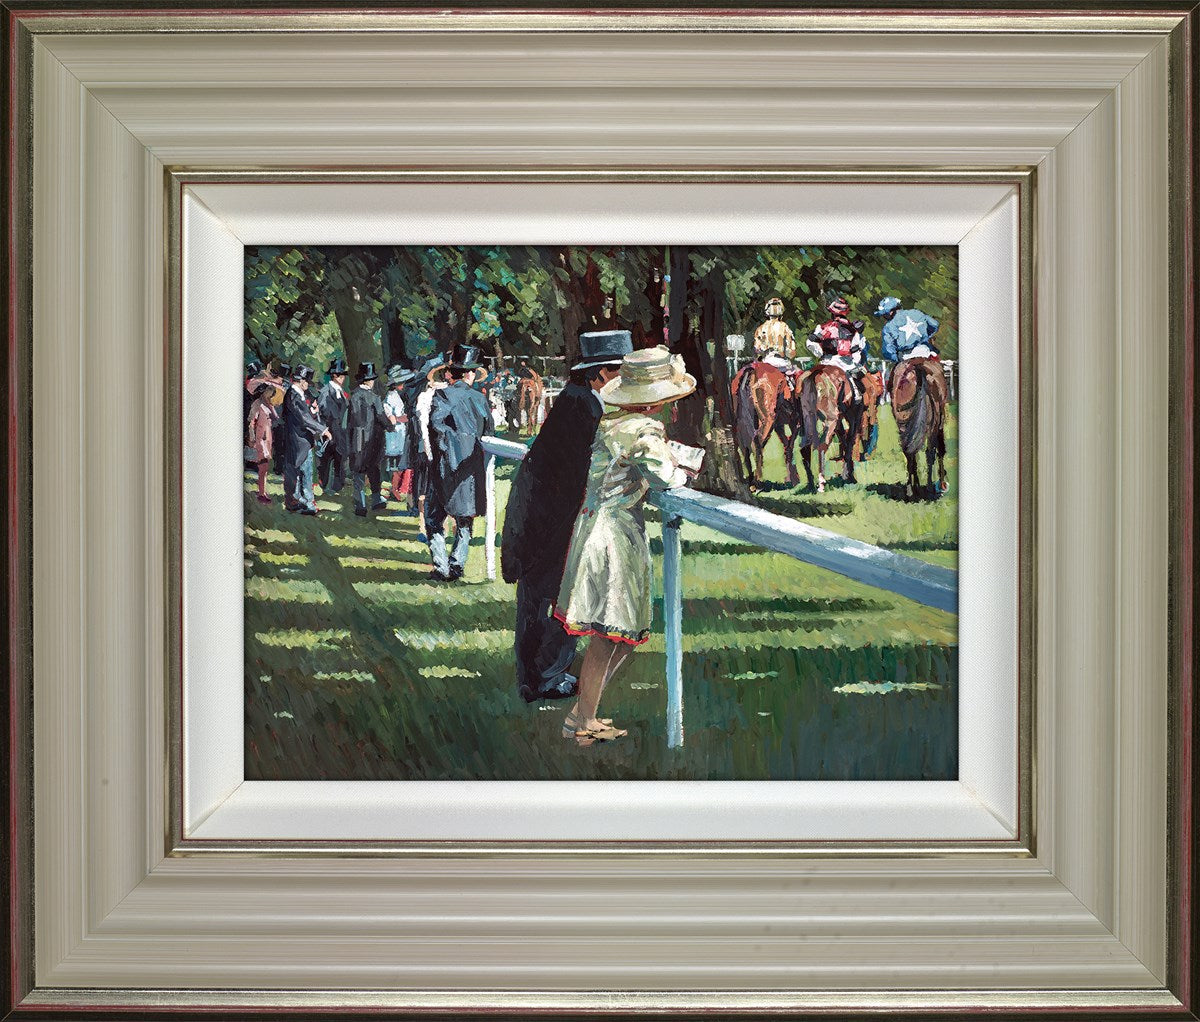 On Parade by Sherree Valentine Daines